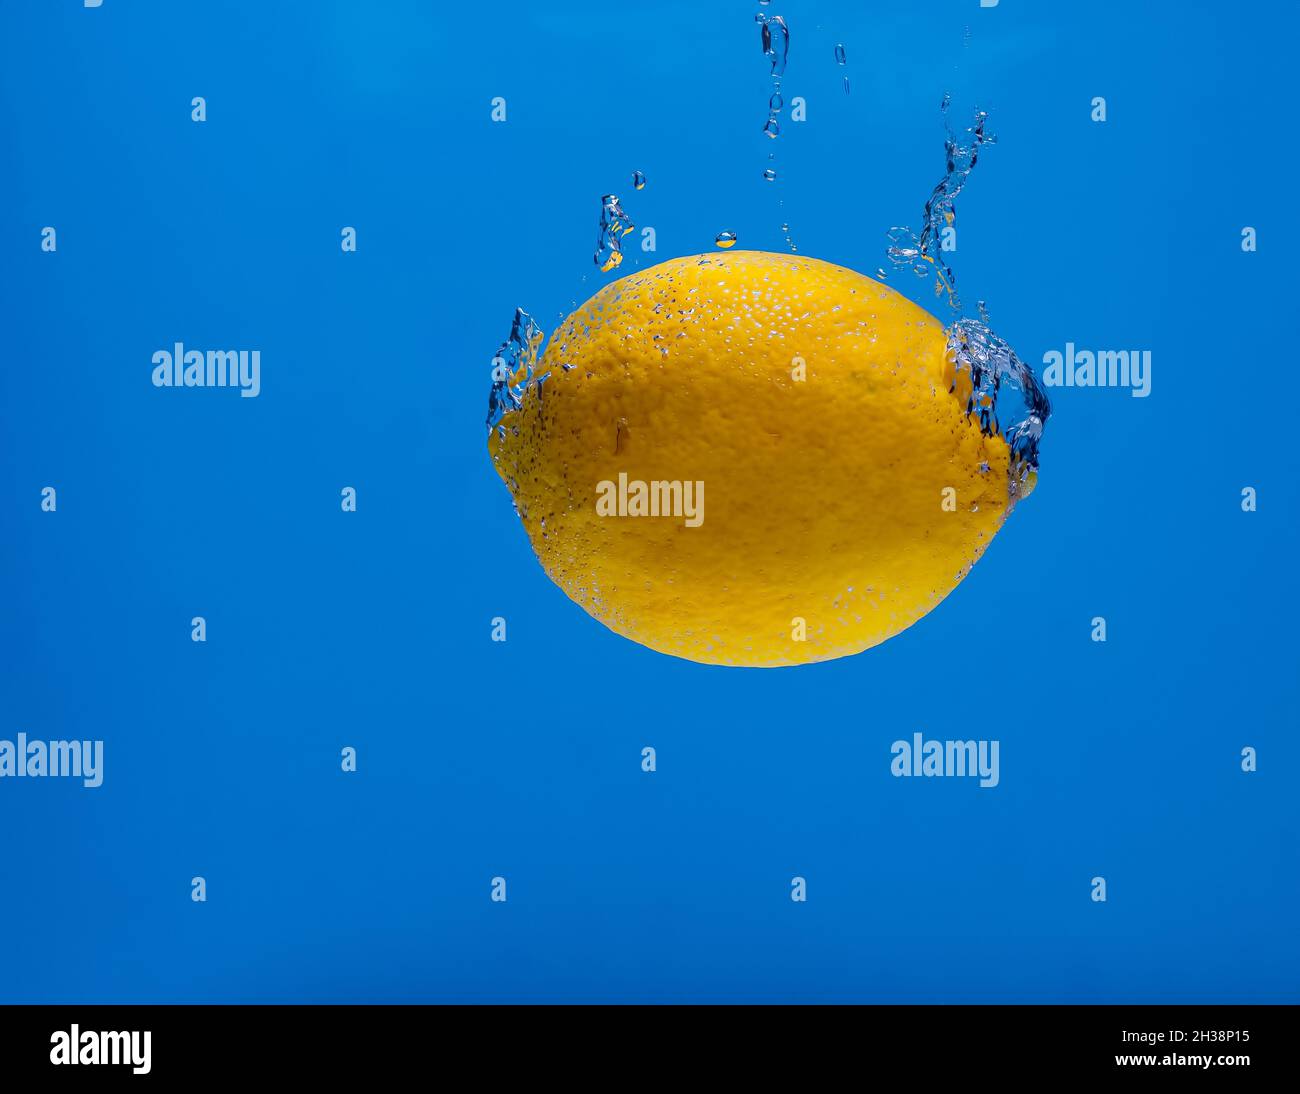 lemon with water bubbles on a blue background Stock Photo